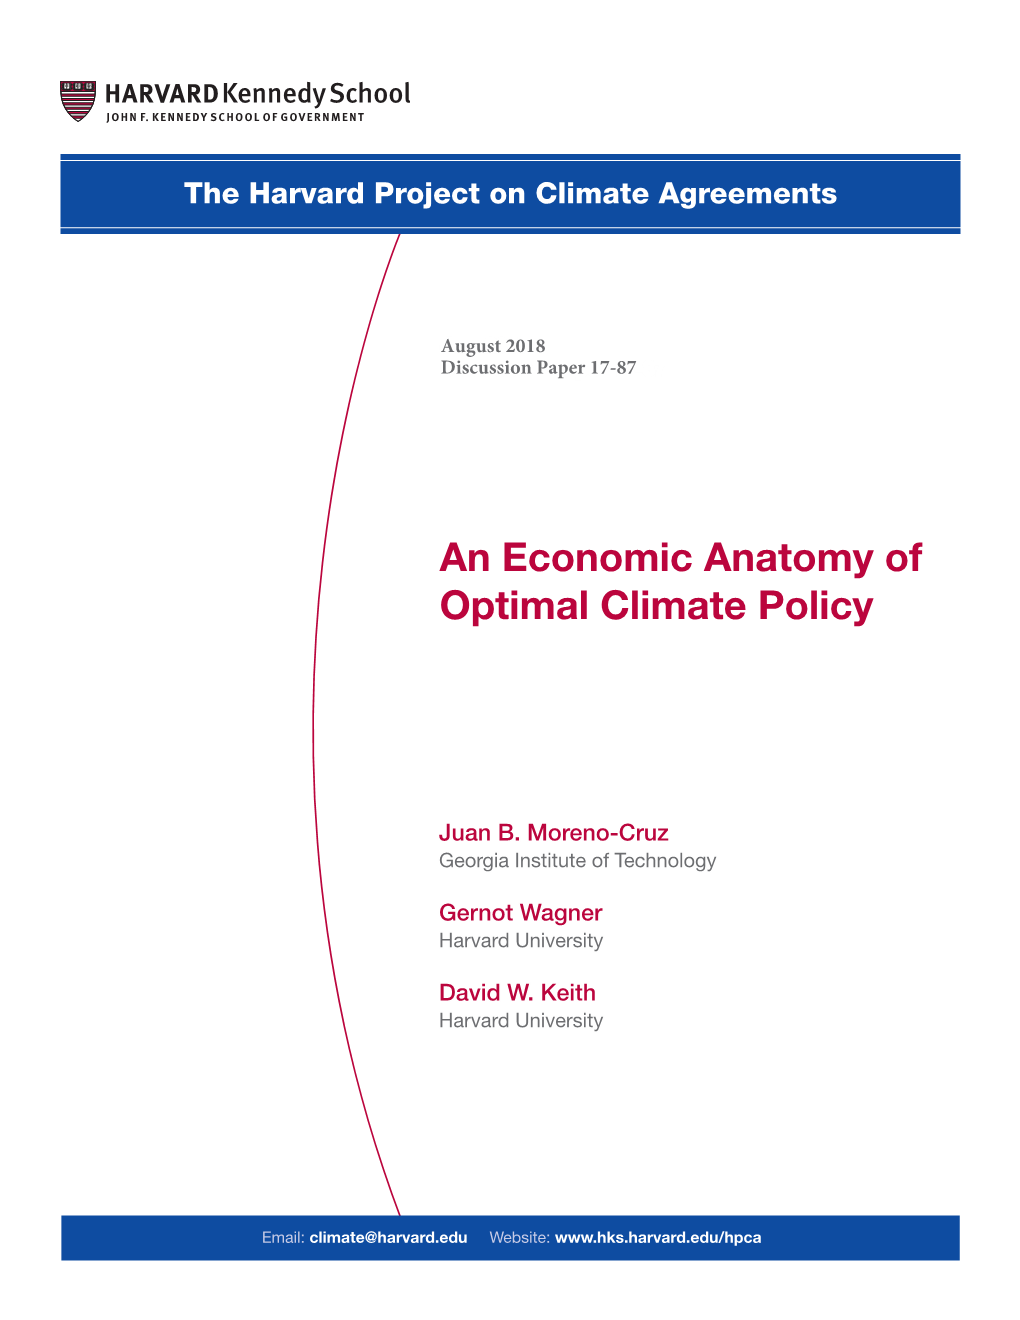 An Economic Anatomy of Optimal Climate Policy